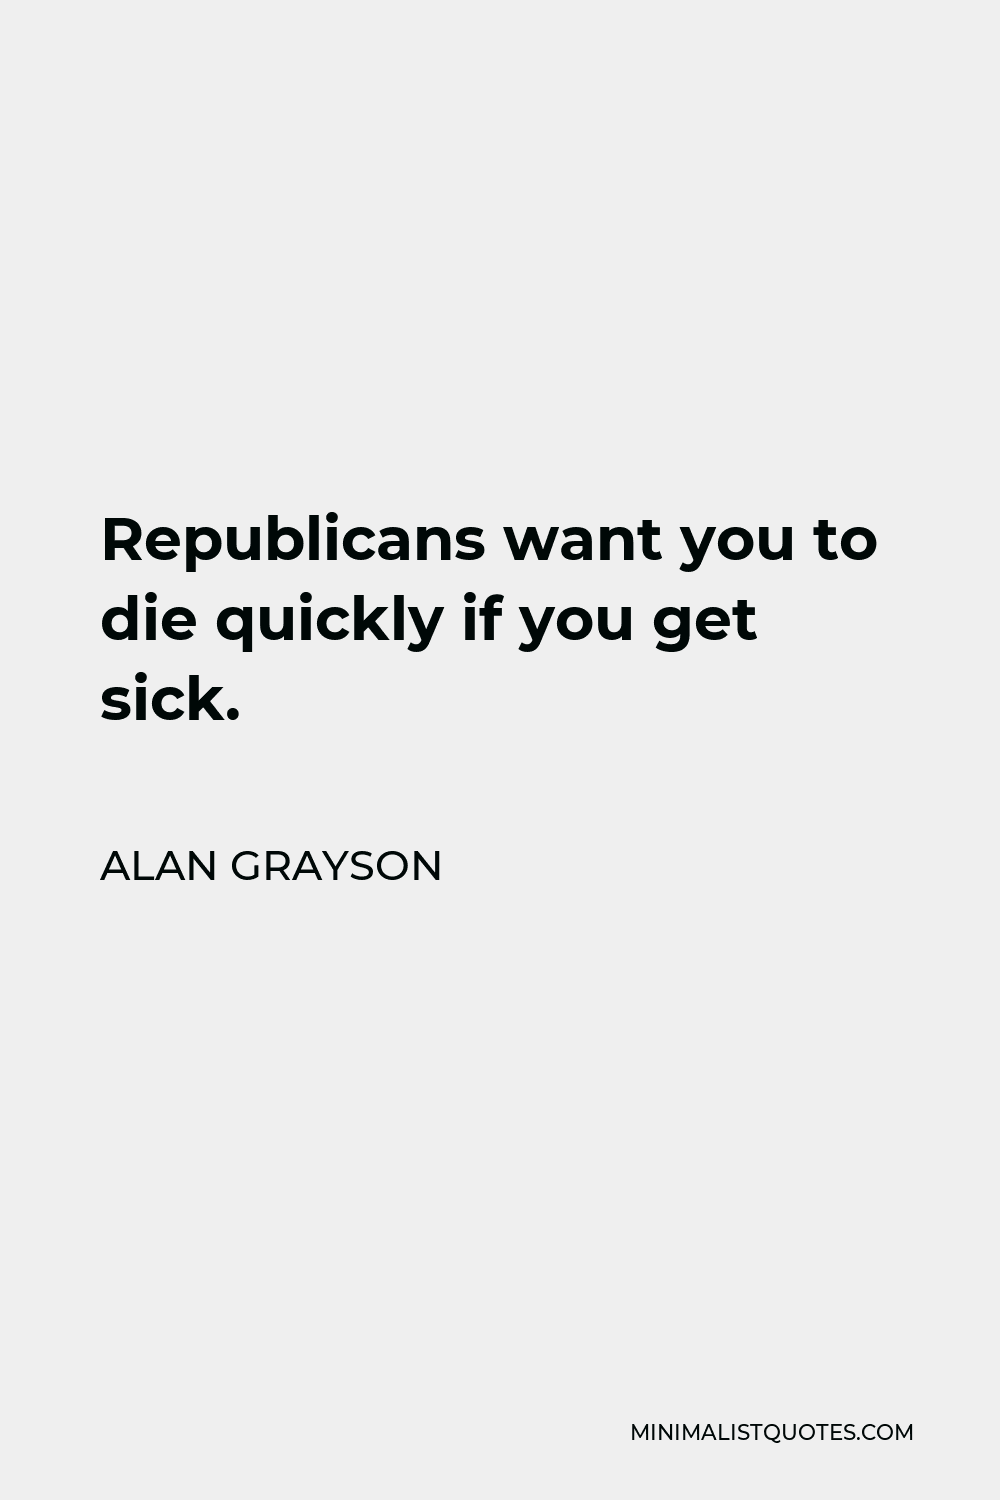 Alan Grayson Quote - Republicans want you to die quickly if you get sick.